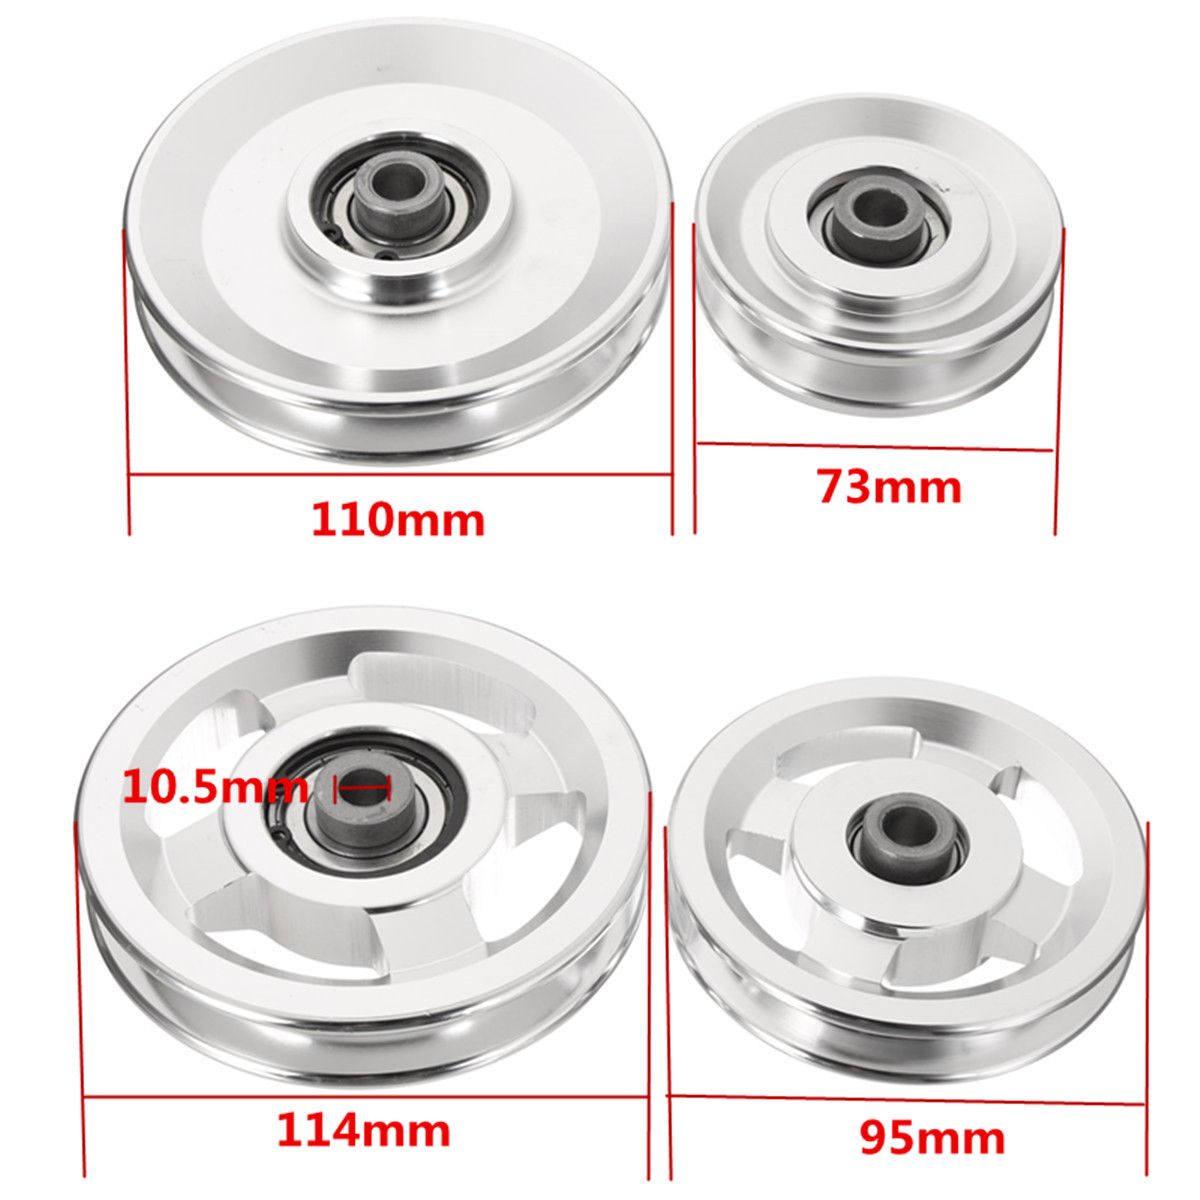 7395110114mm-Aluminum-Alloy-Bearing-Pulley-Wheels-Gym-Fitness-Equipment-Parts-Accessories-1637784-5